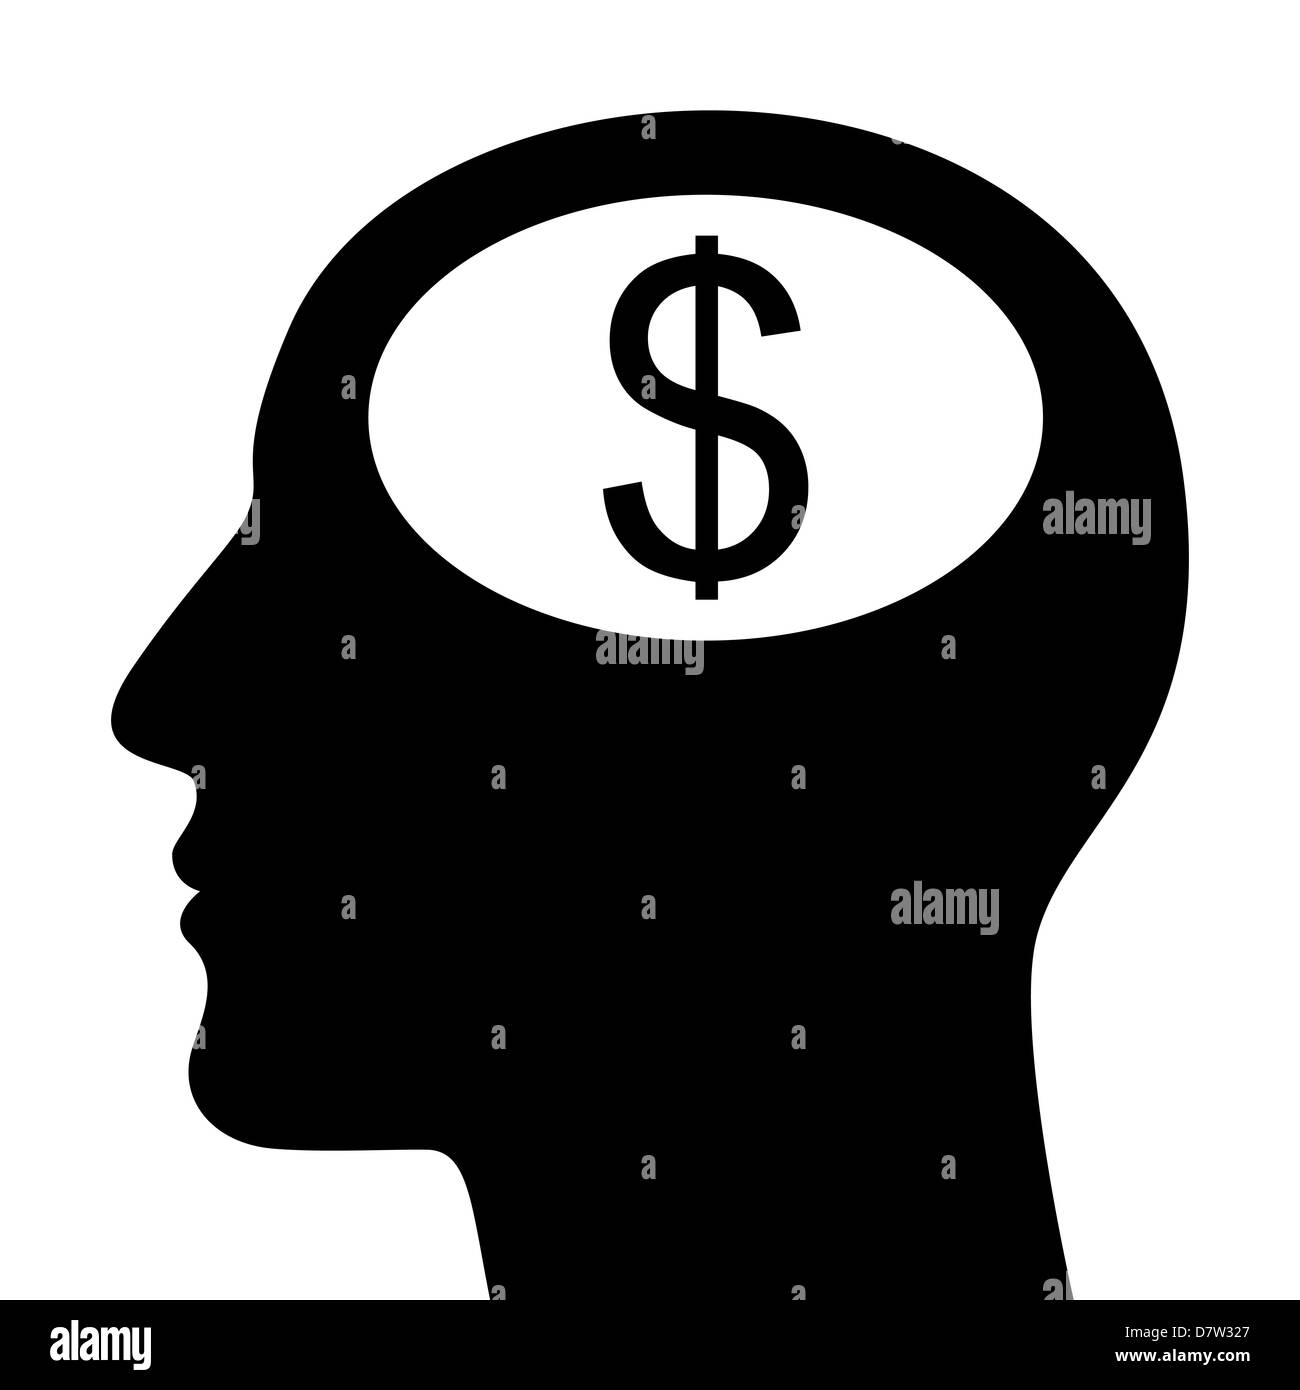 SIlhouette of head with dollar sign isolated on white Stock Photo